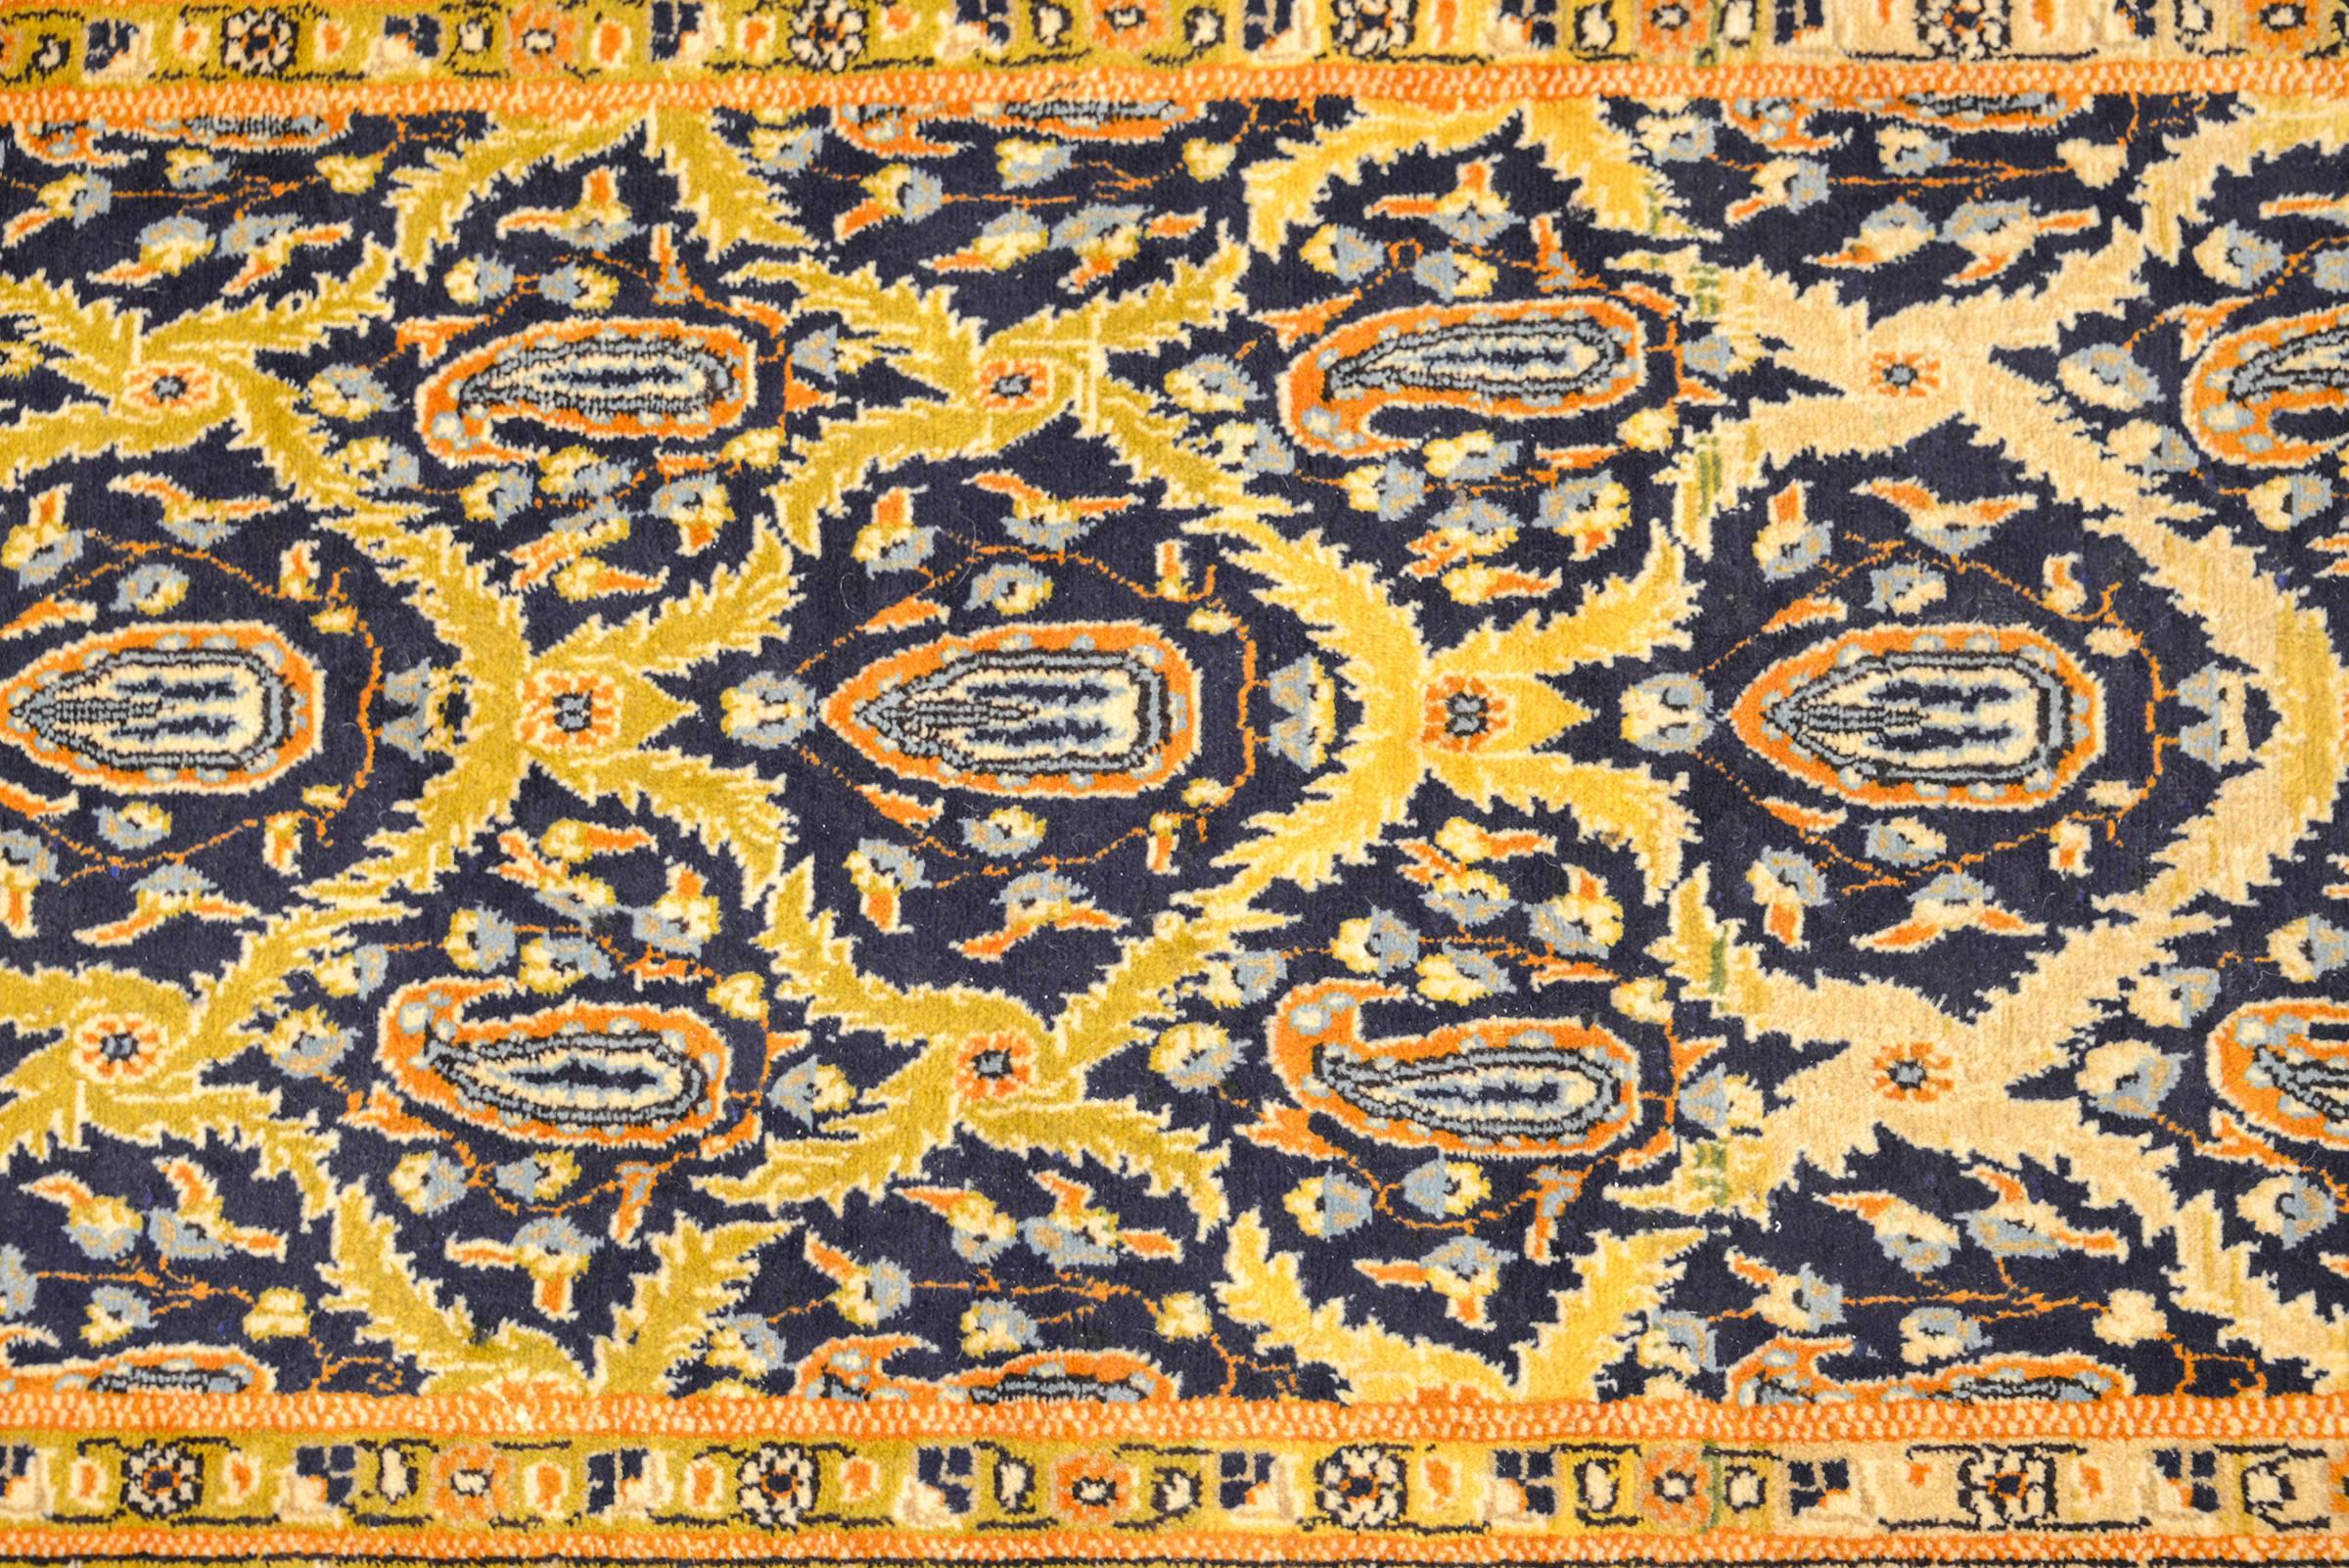 An early 20th century Persian Tabriz runner with a beautiful all-over trellis and paisley pattern woven in cream, gold, and indigo dyed wool. The border is complementary, but woven in contrasting colors of orange, white and indigo.